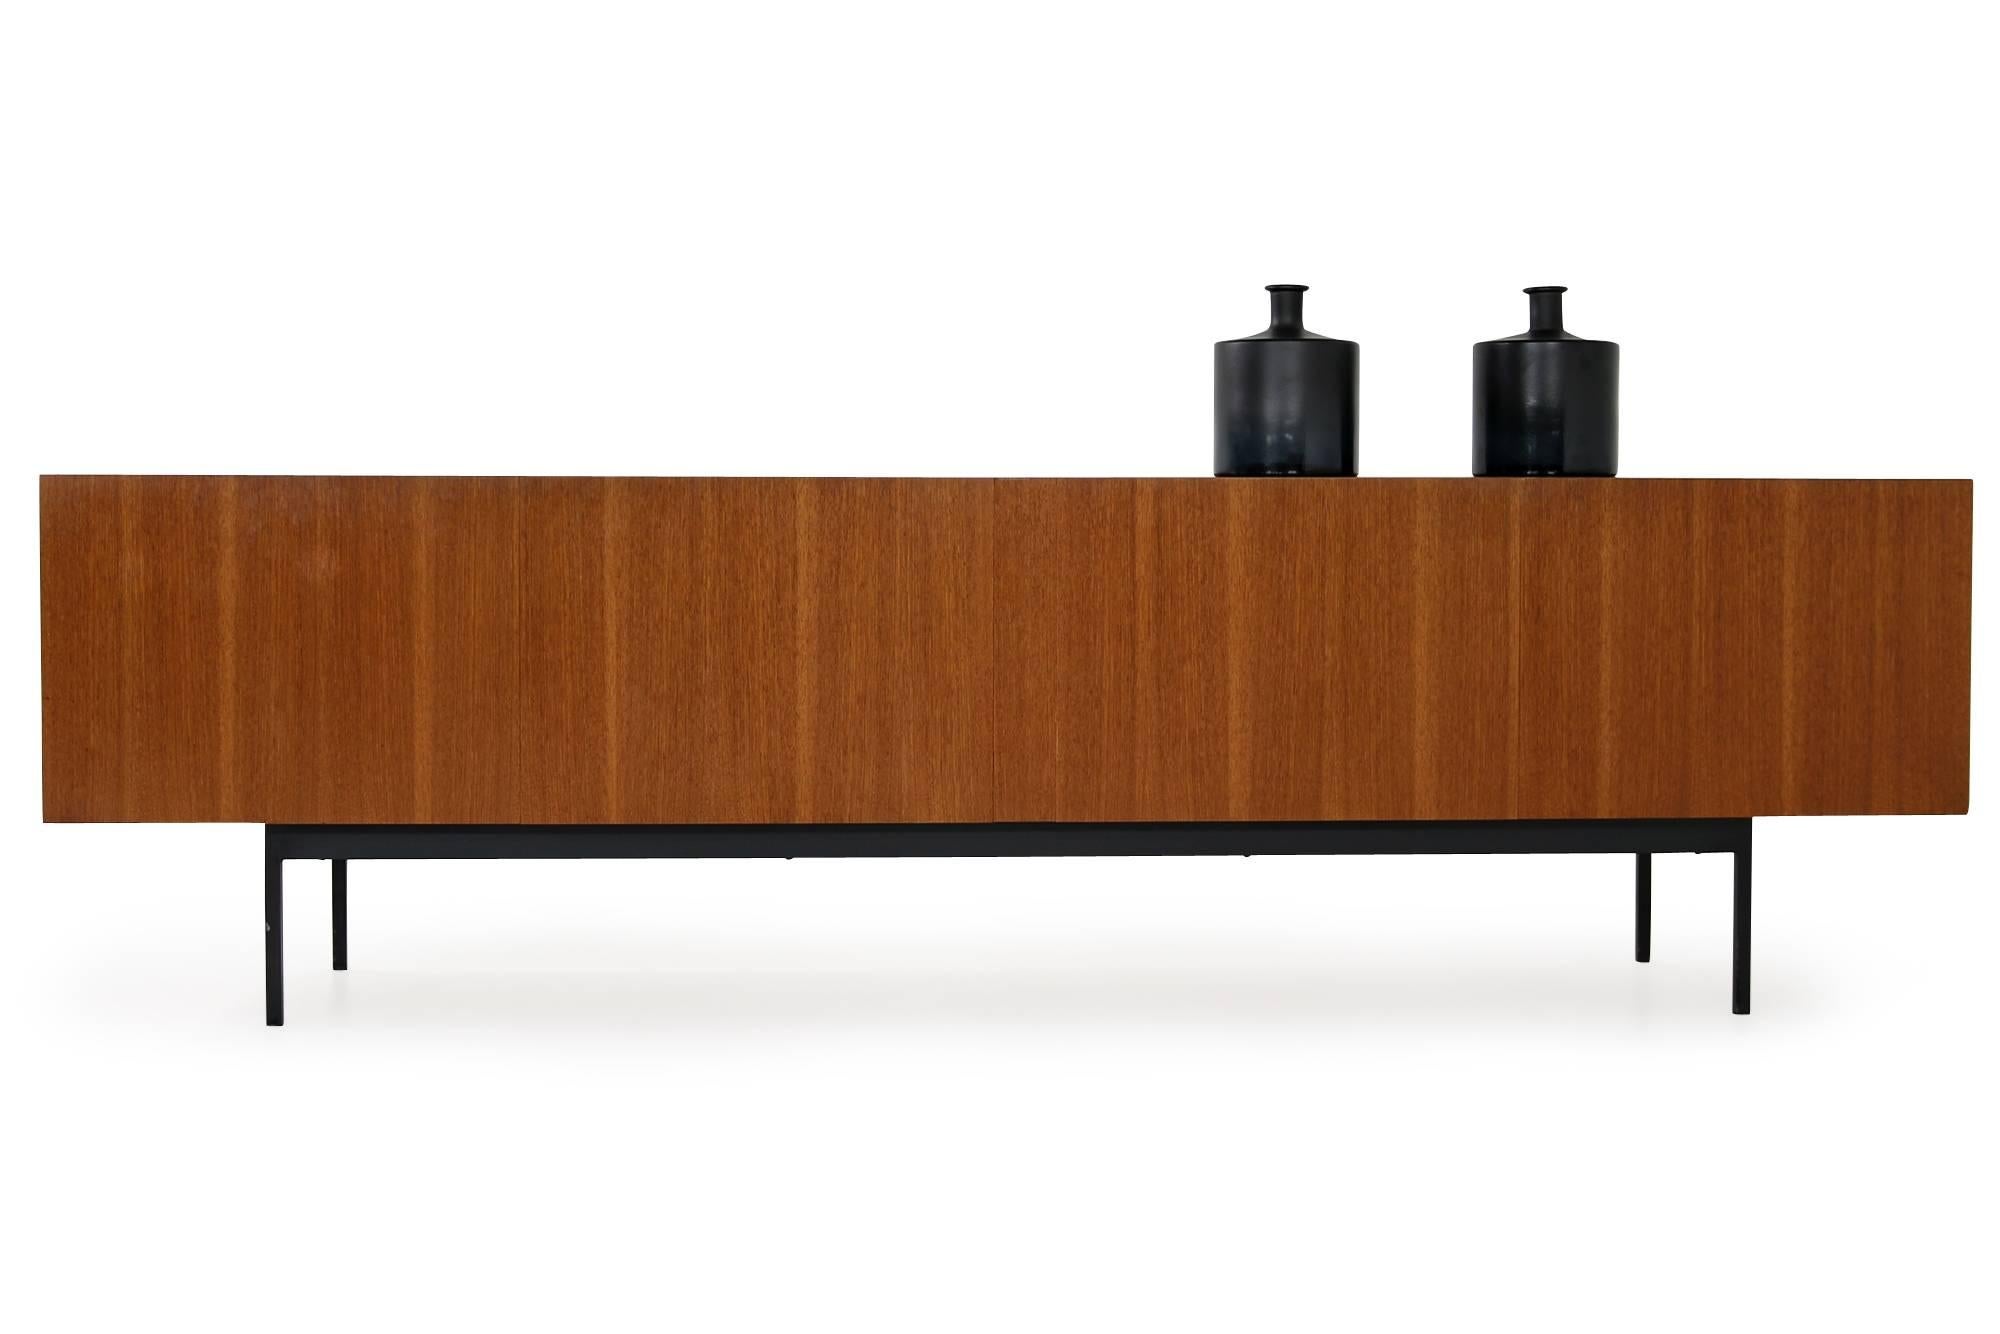 Beautiful and large 1960s sideboard, Dieter Waeckerlin Mod. B40 for Behr credenza in teak. Very good condition, inside with maple wood in an amazing condition. It's like new inside, almost no traces of use, really amazing. Beautiful Minimalist